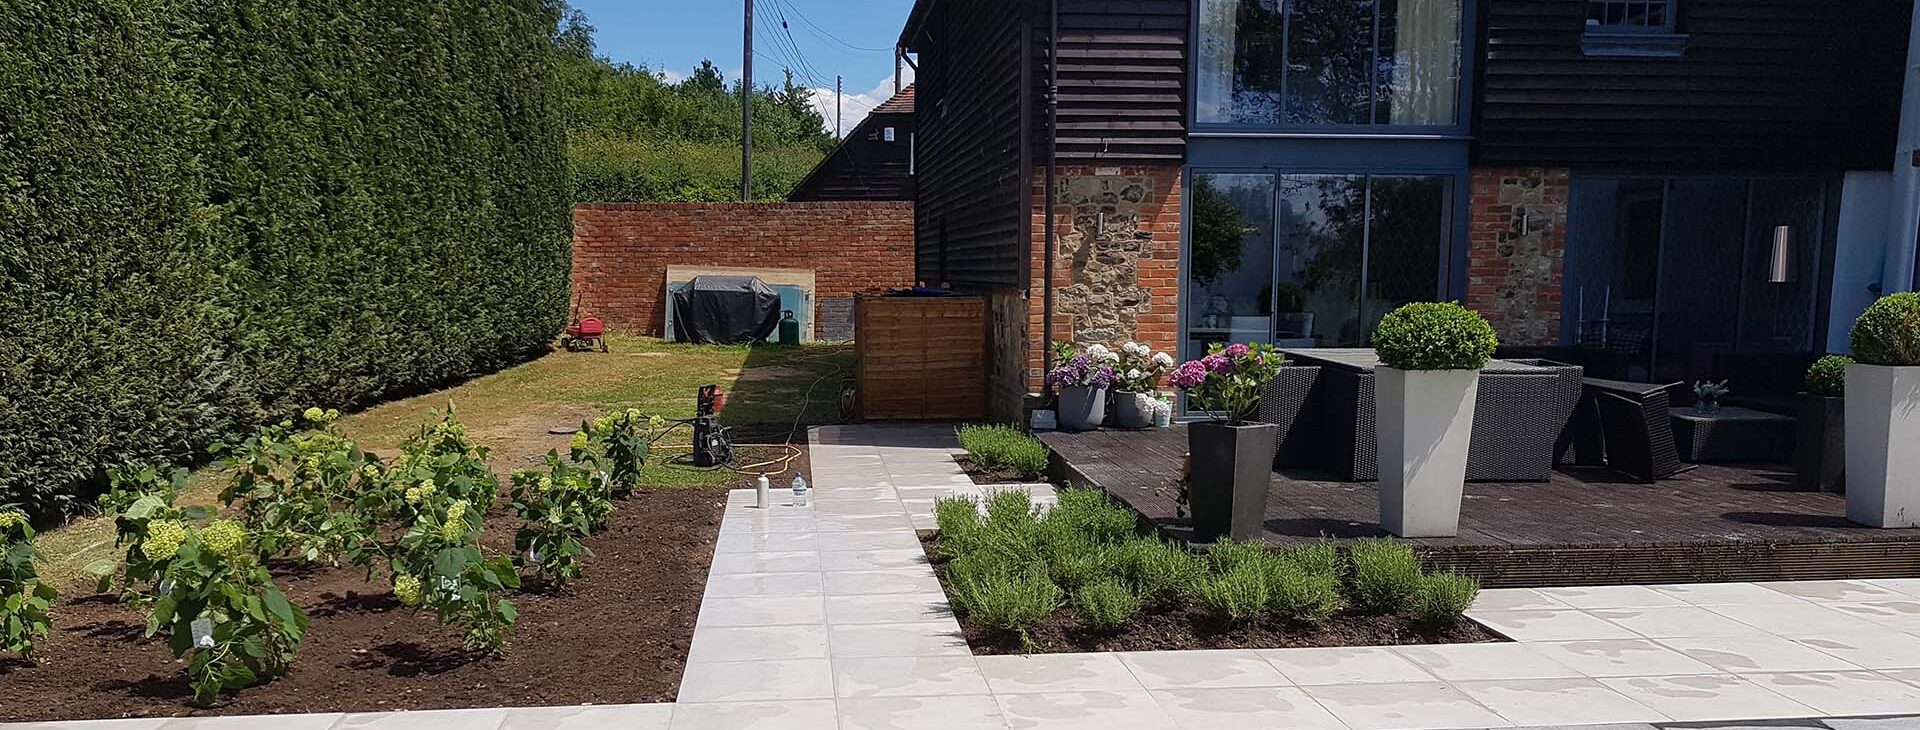 We've been providing landscaping<br />
services for over 10 Years